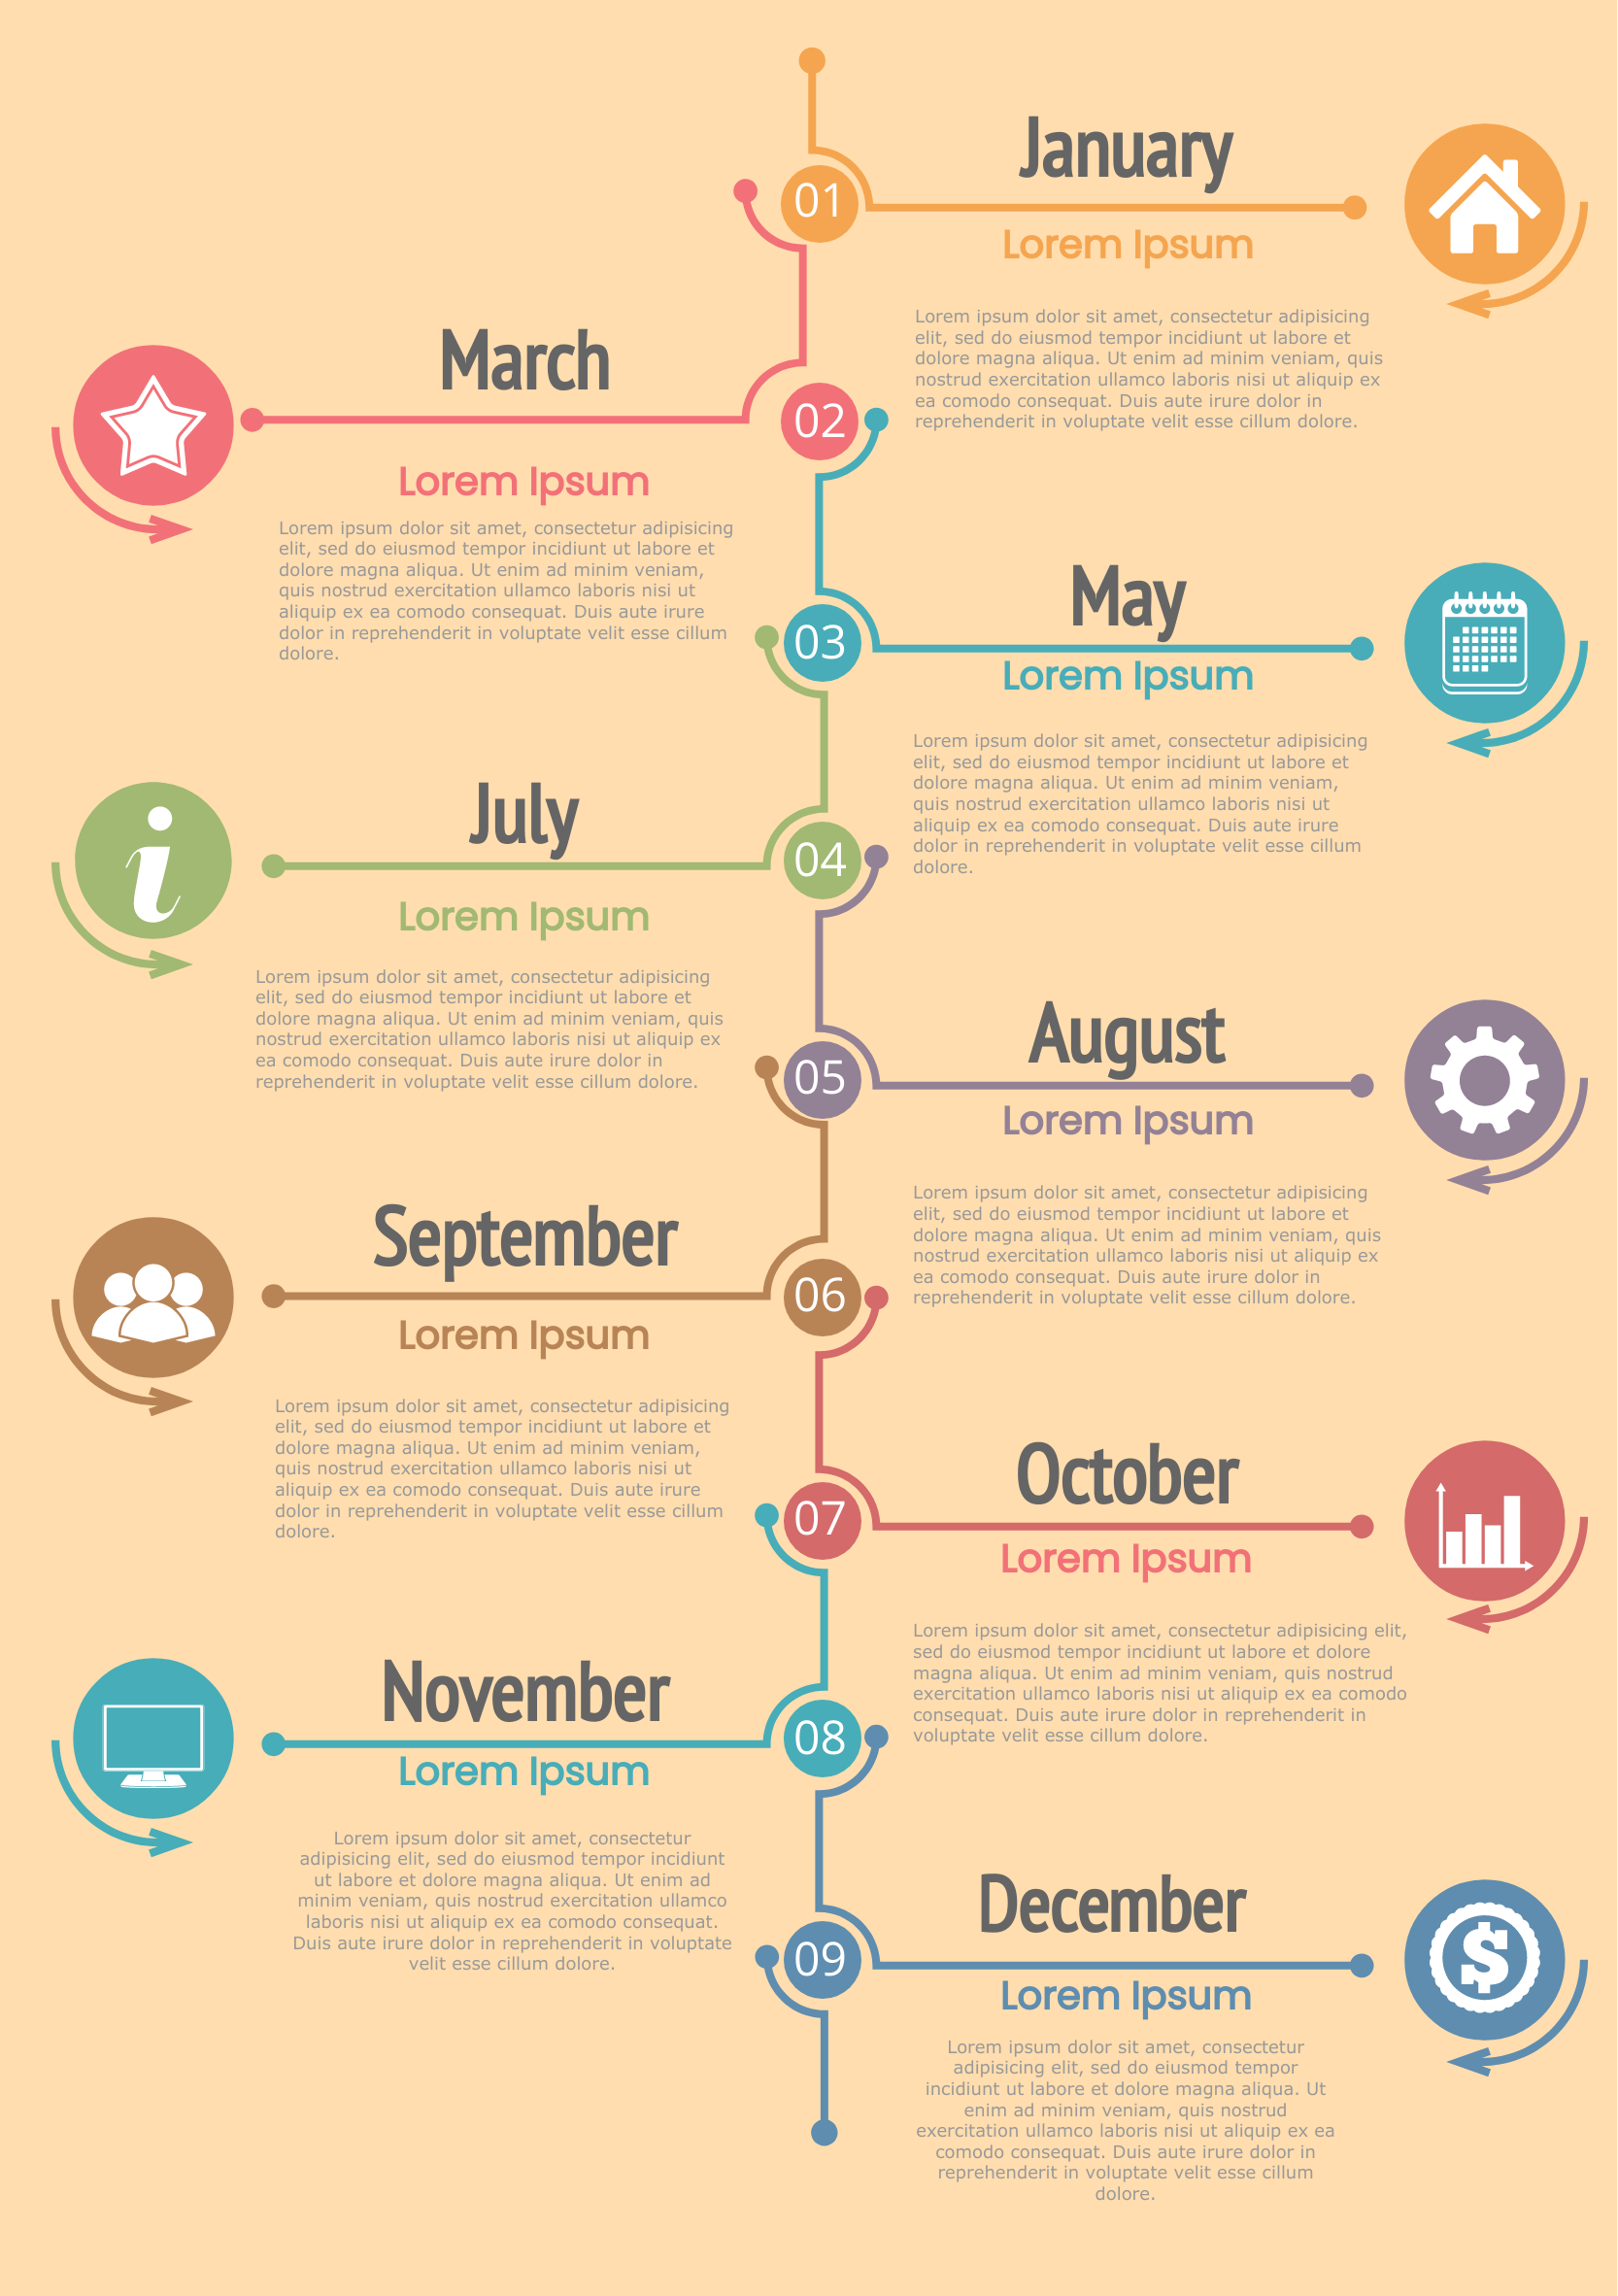 infographic timeline documents